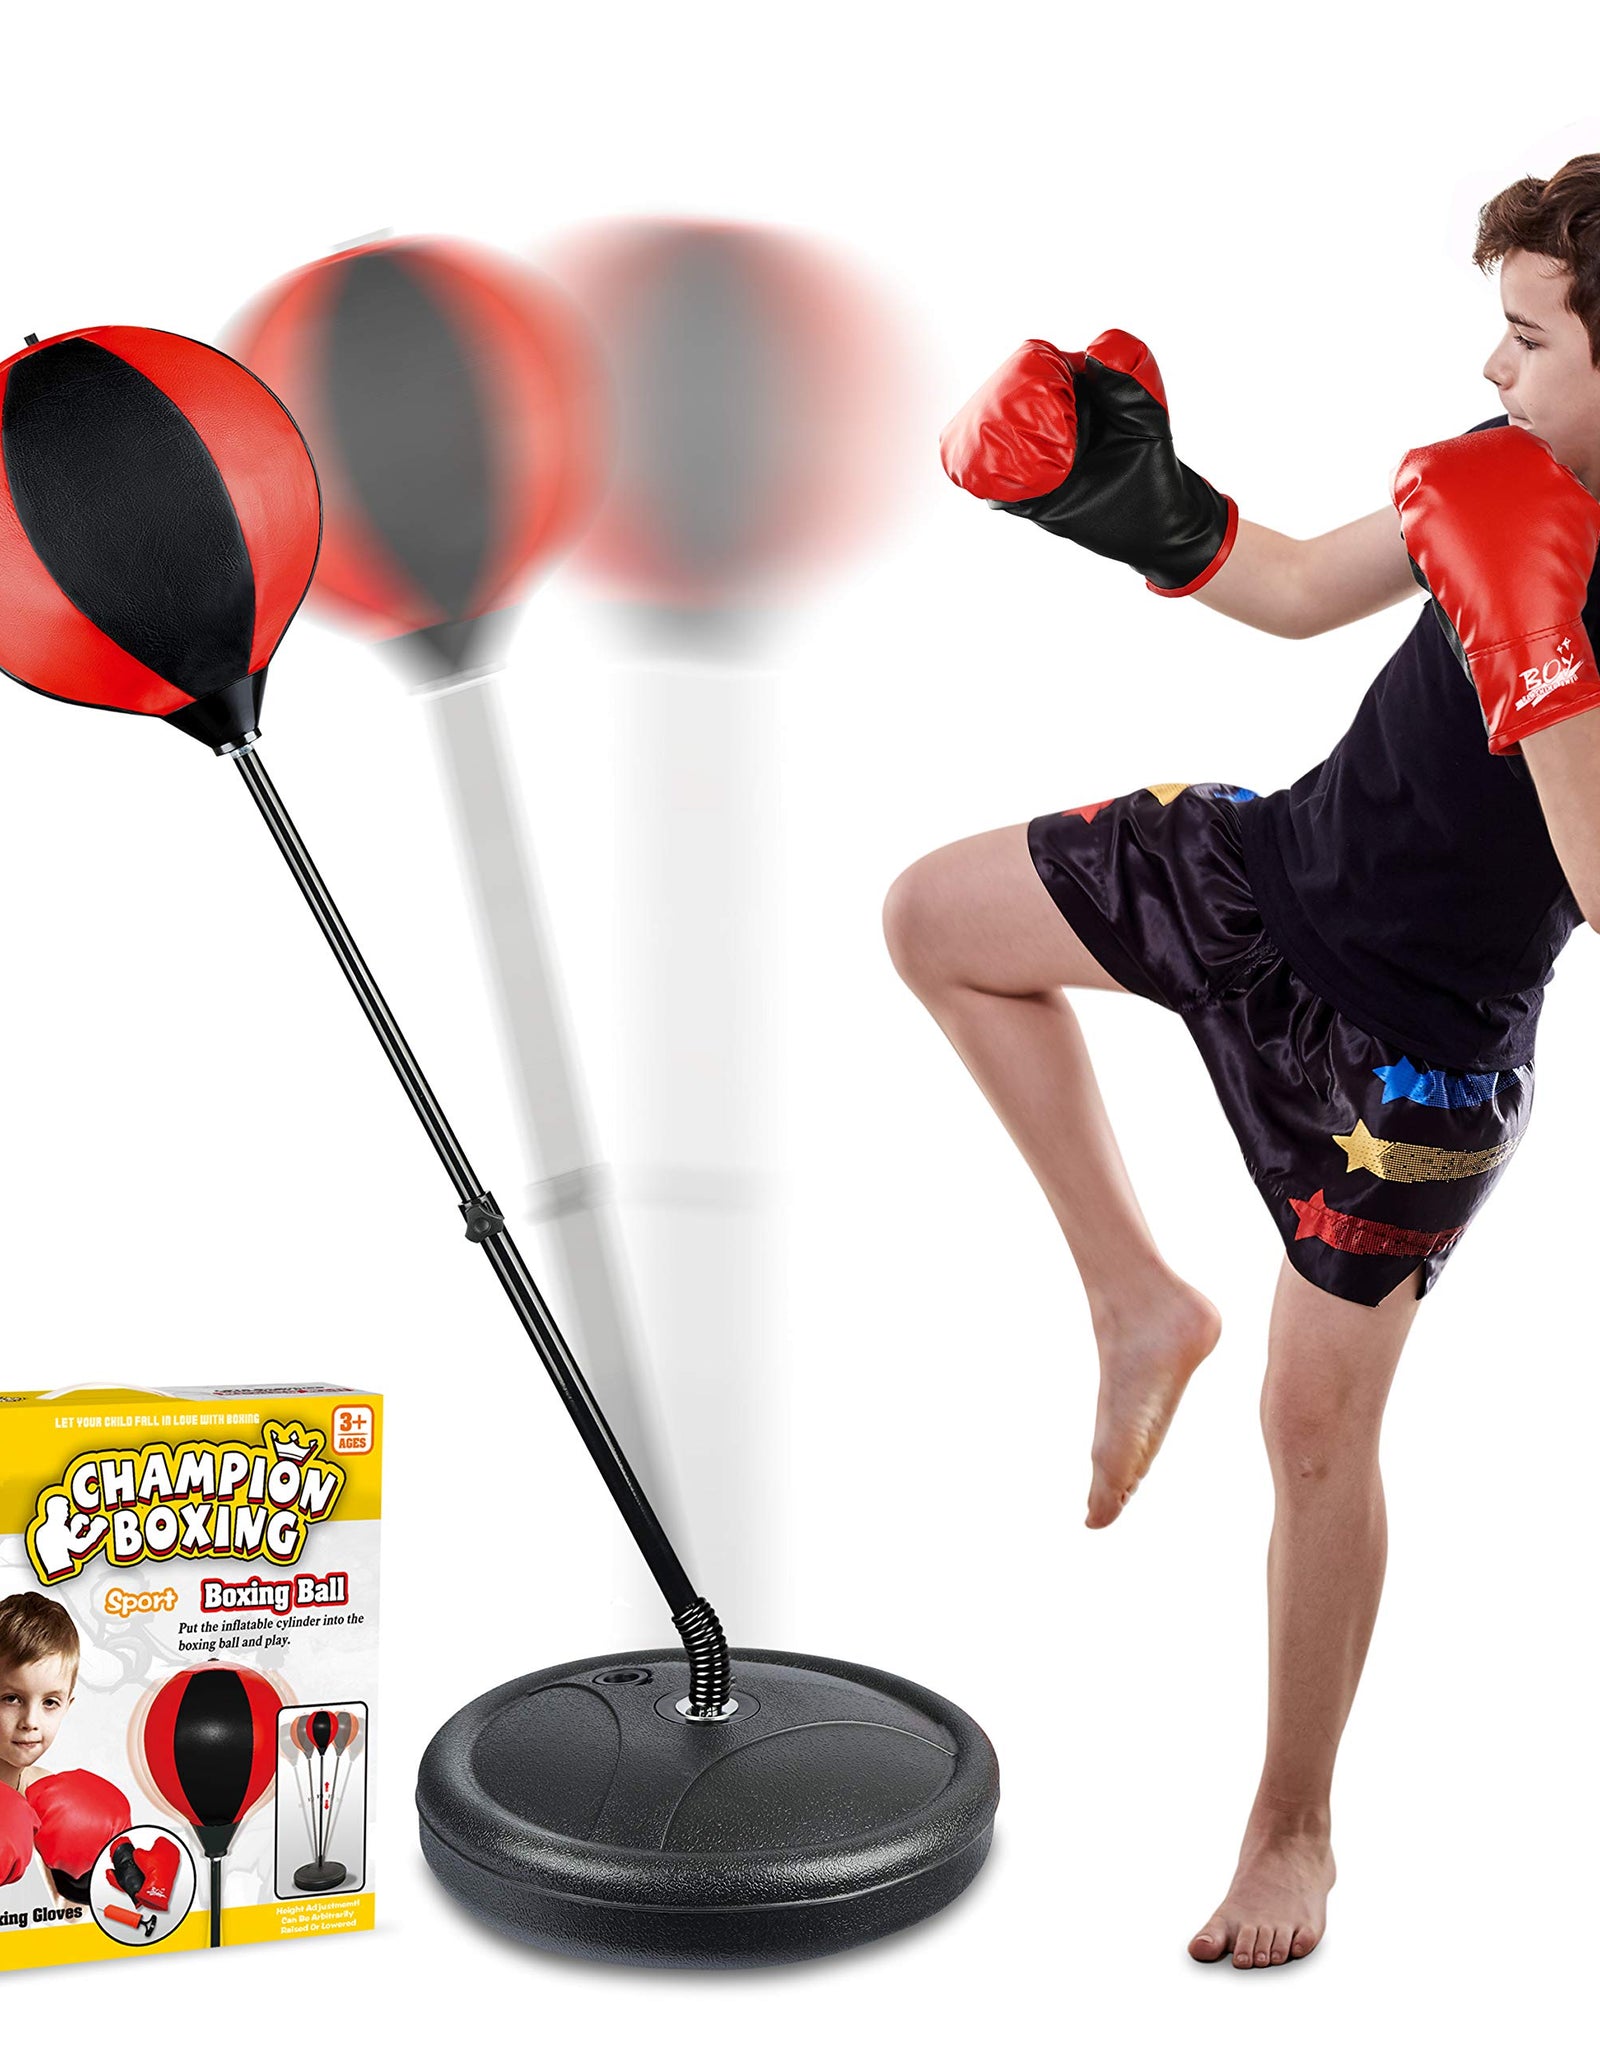 Punching Bag Set for Kids Incl Punching Ball with Stand, Boxing Training Gloves, Hand Pump and Adjustable Height Stand, Boxing Ball Set Toy Gifts for Age 6 7 8 9 10 11 12Year Old Boys Girls